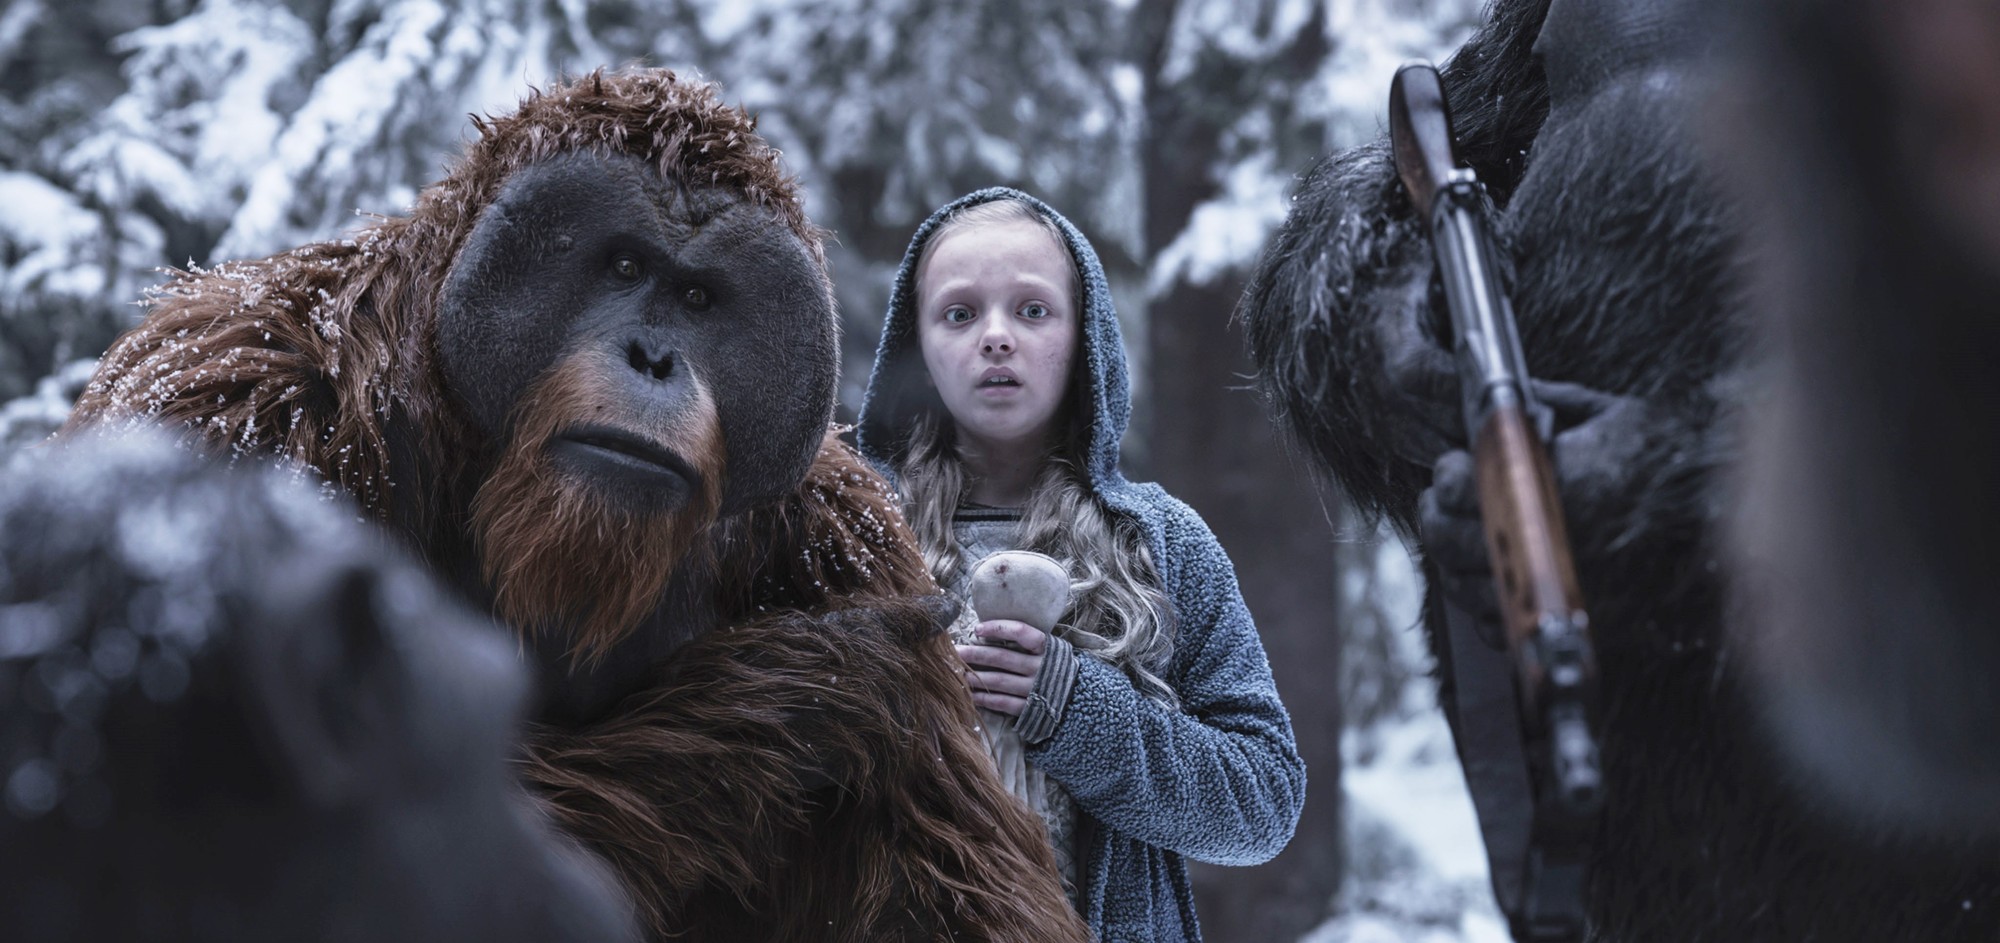 Maurice and Amiah Miller (Nova) in 20th Century Fox's War for the Planet of the Apes (2017)